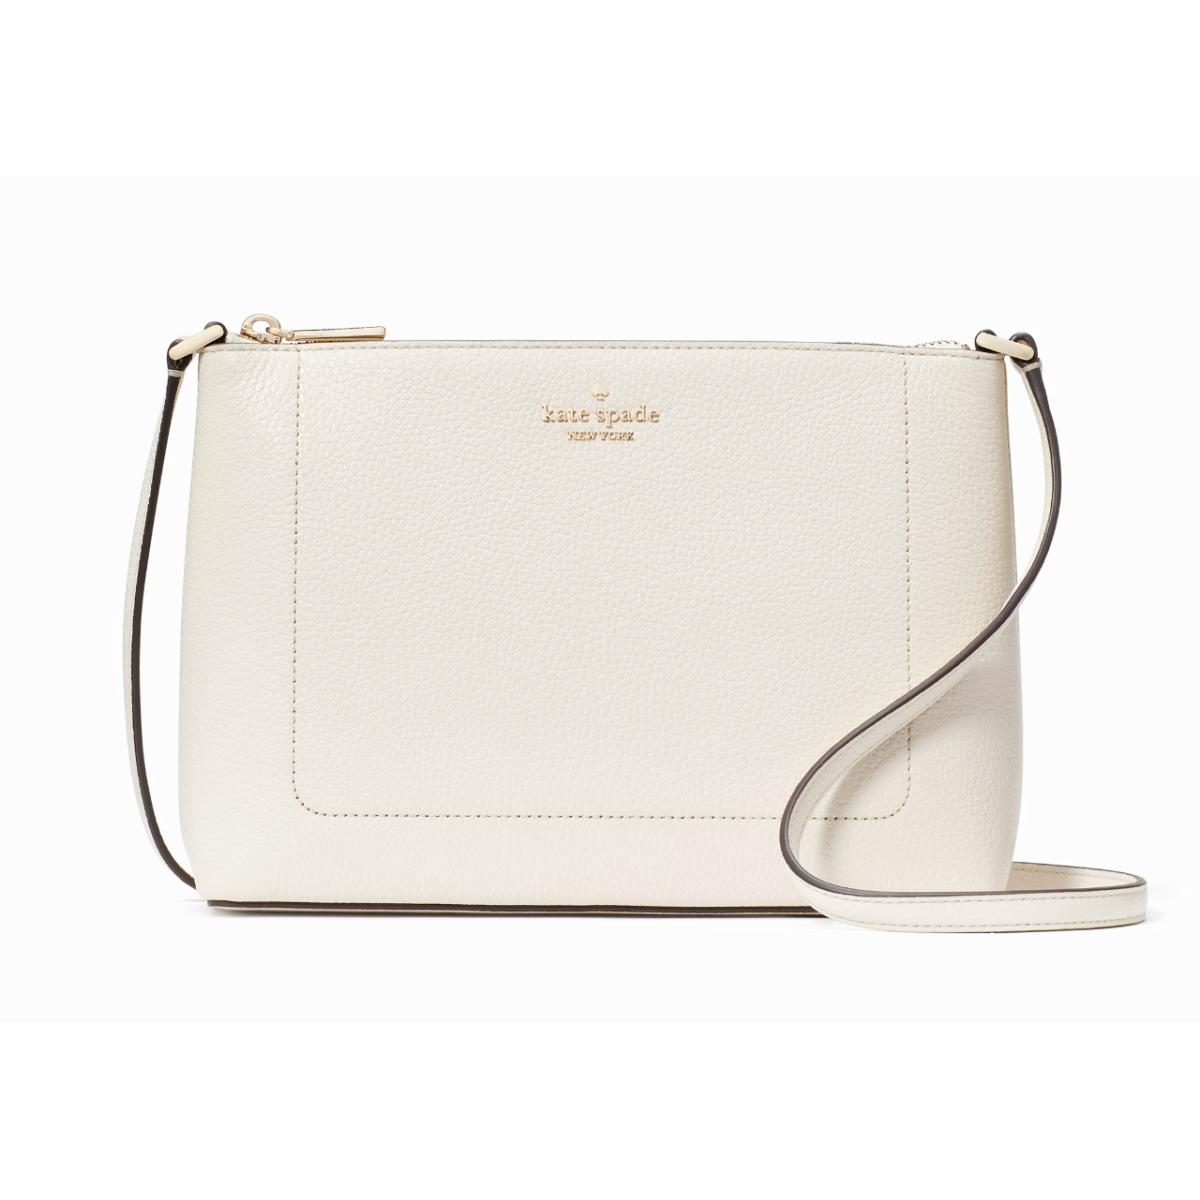 New Kate Spade Leila Crossbody Pebble Leather Parchment